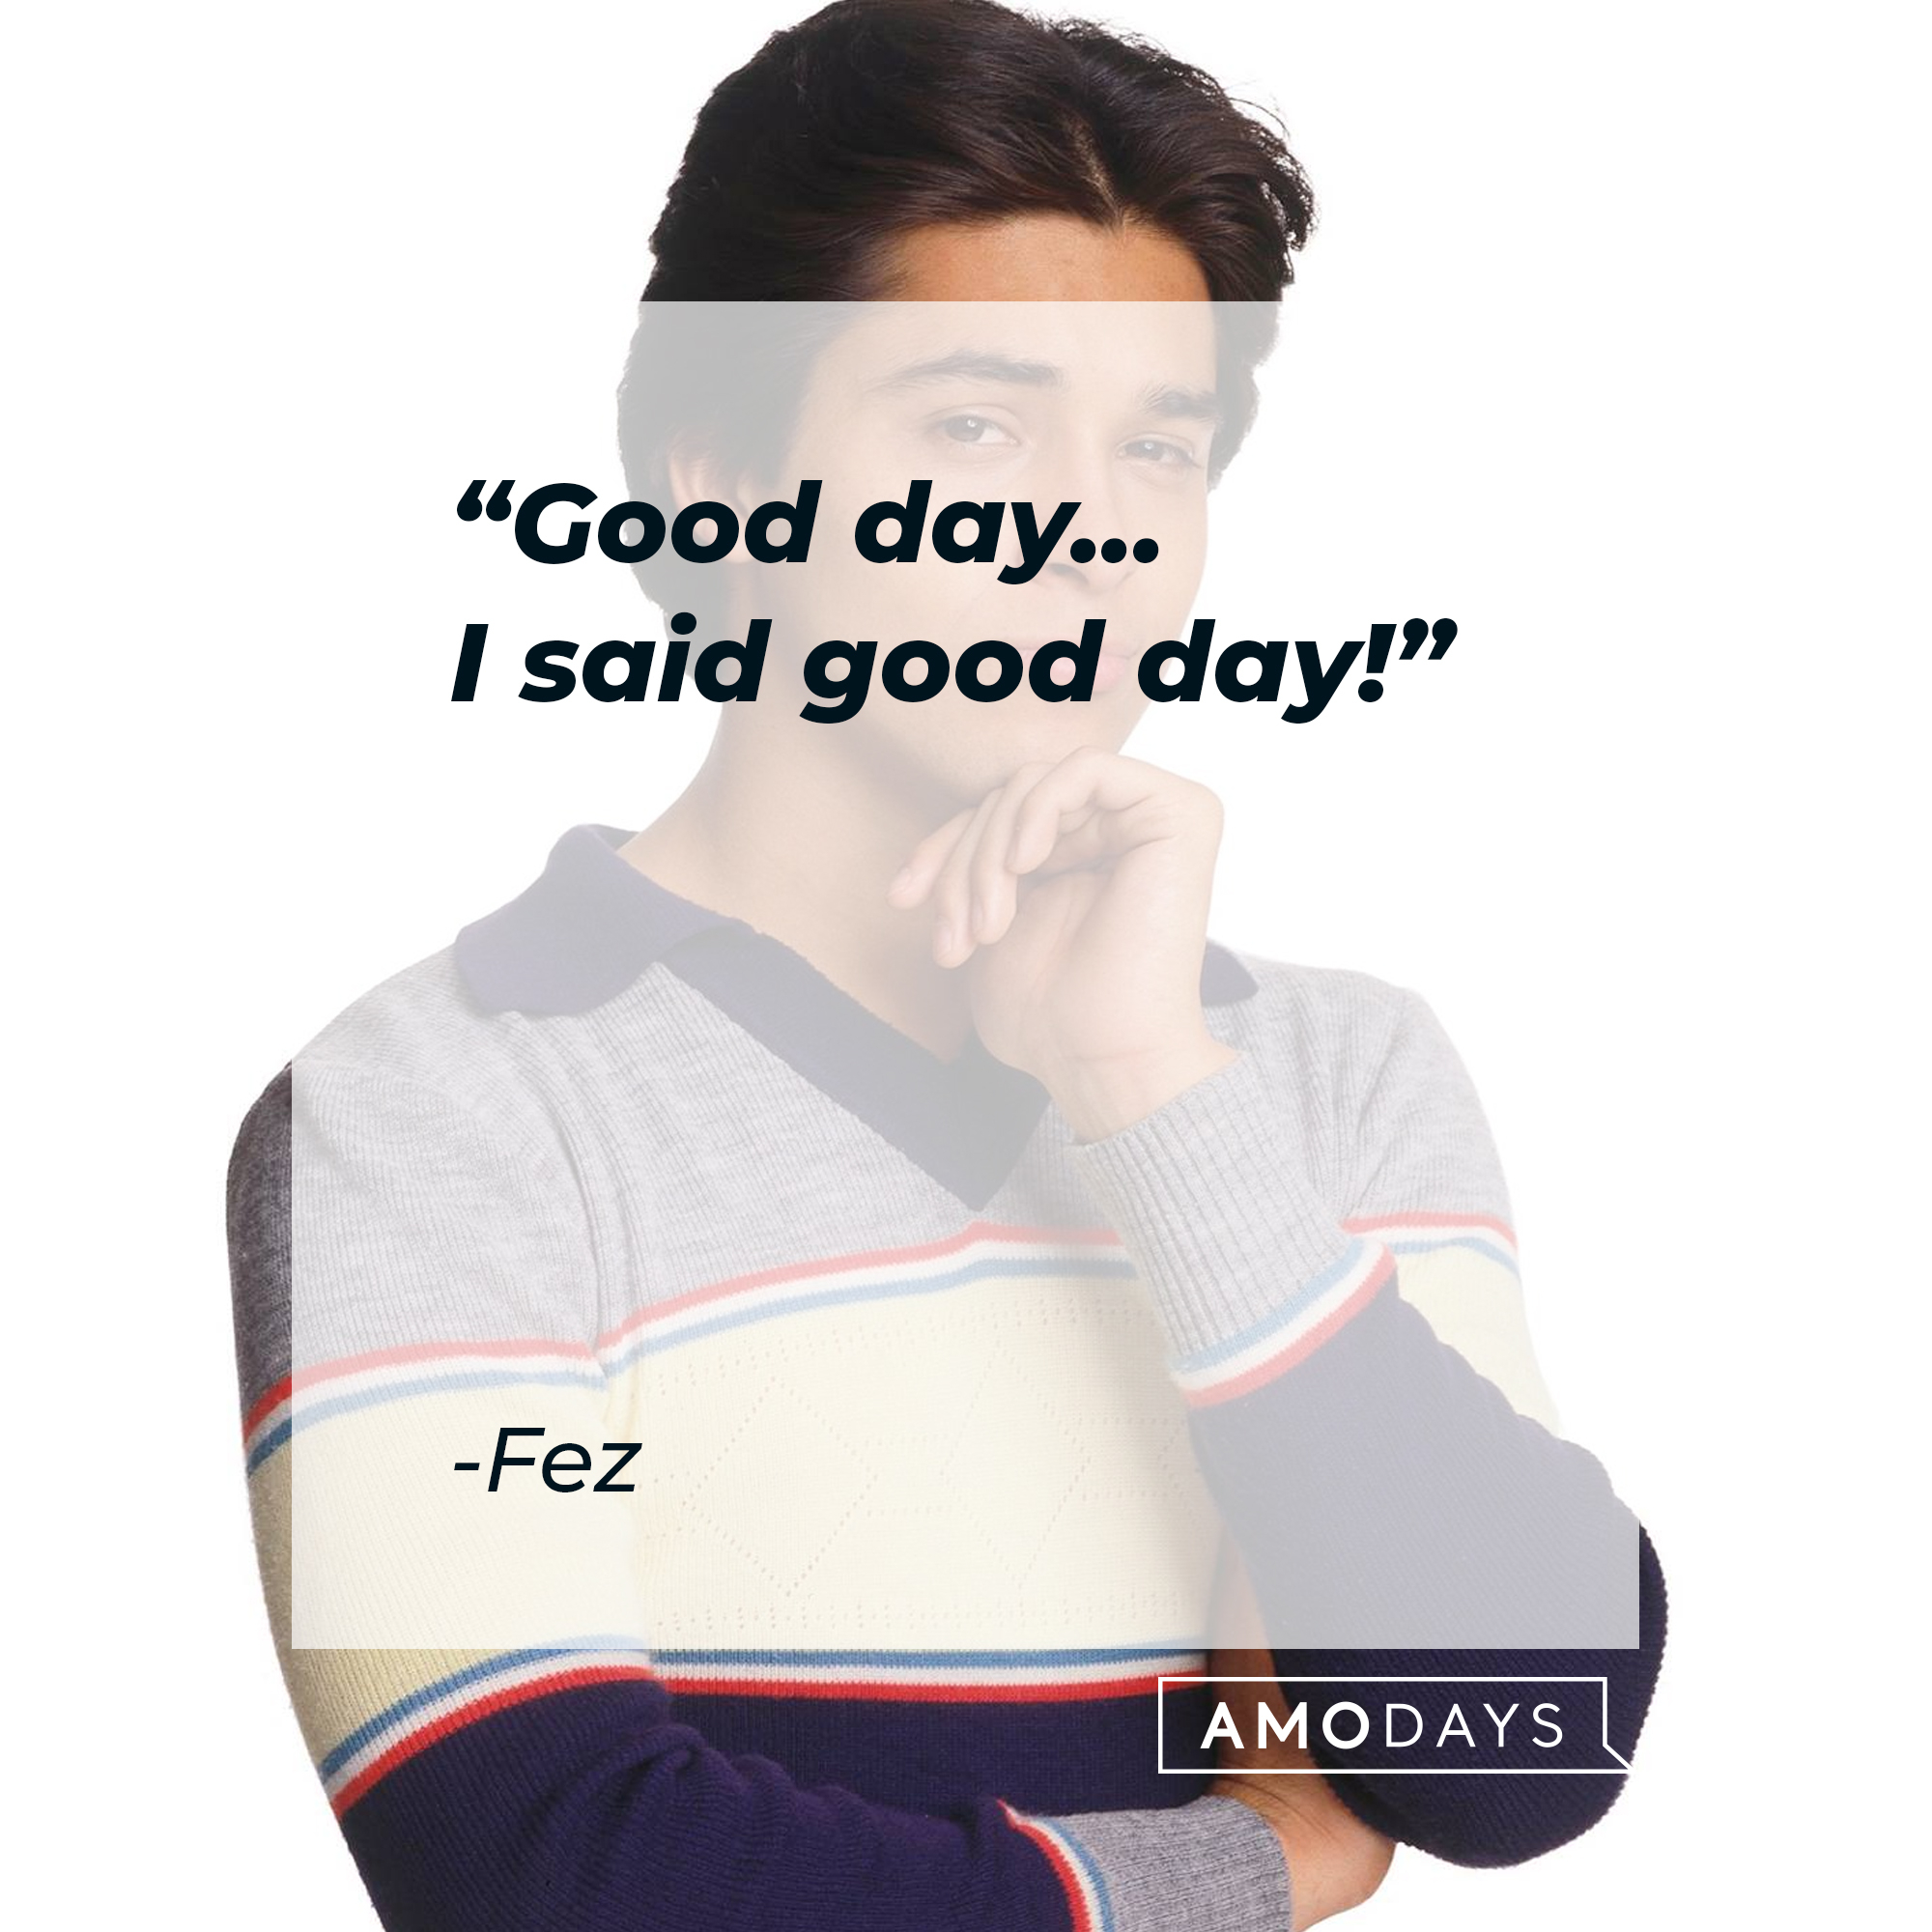 Fez's quote: "Good day... I said good day!" | Source: facebook.com/That-70s-Show-Official